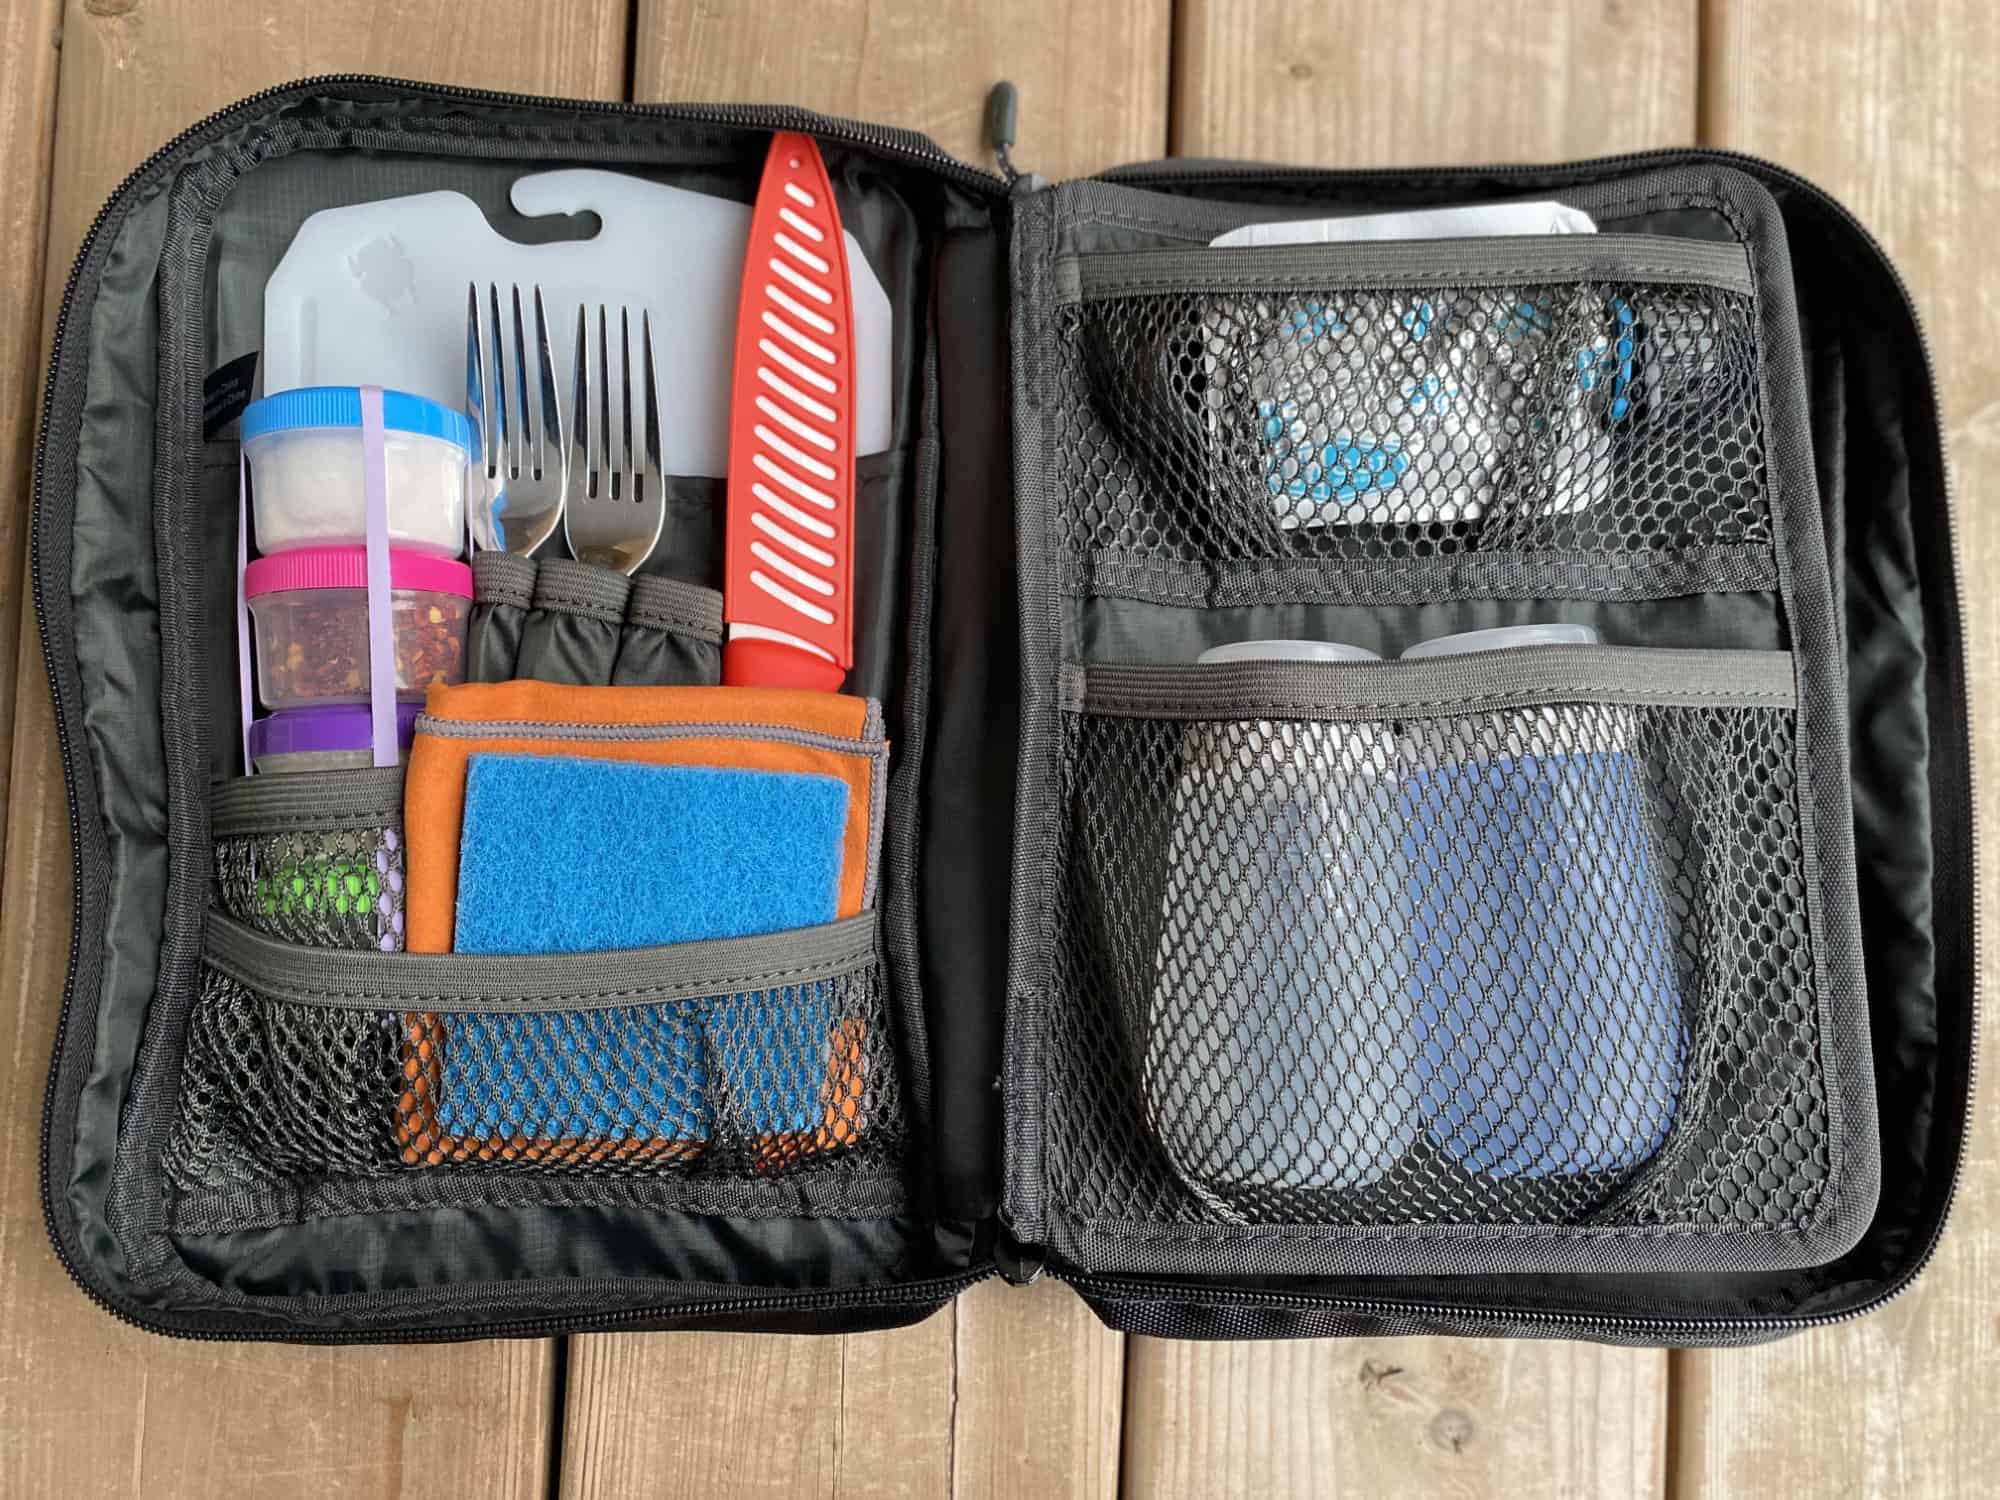 Cooking While Traveling: Gear & Gadgets for Kitchens On the Go